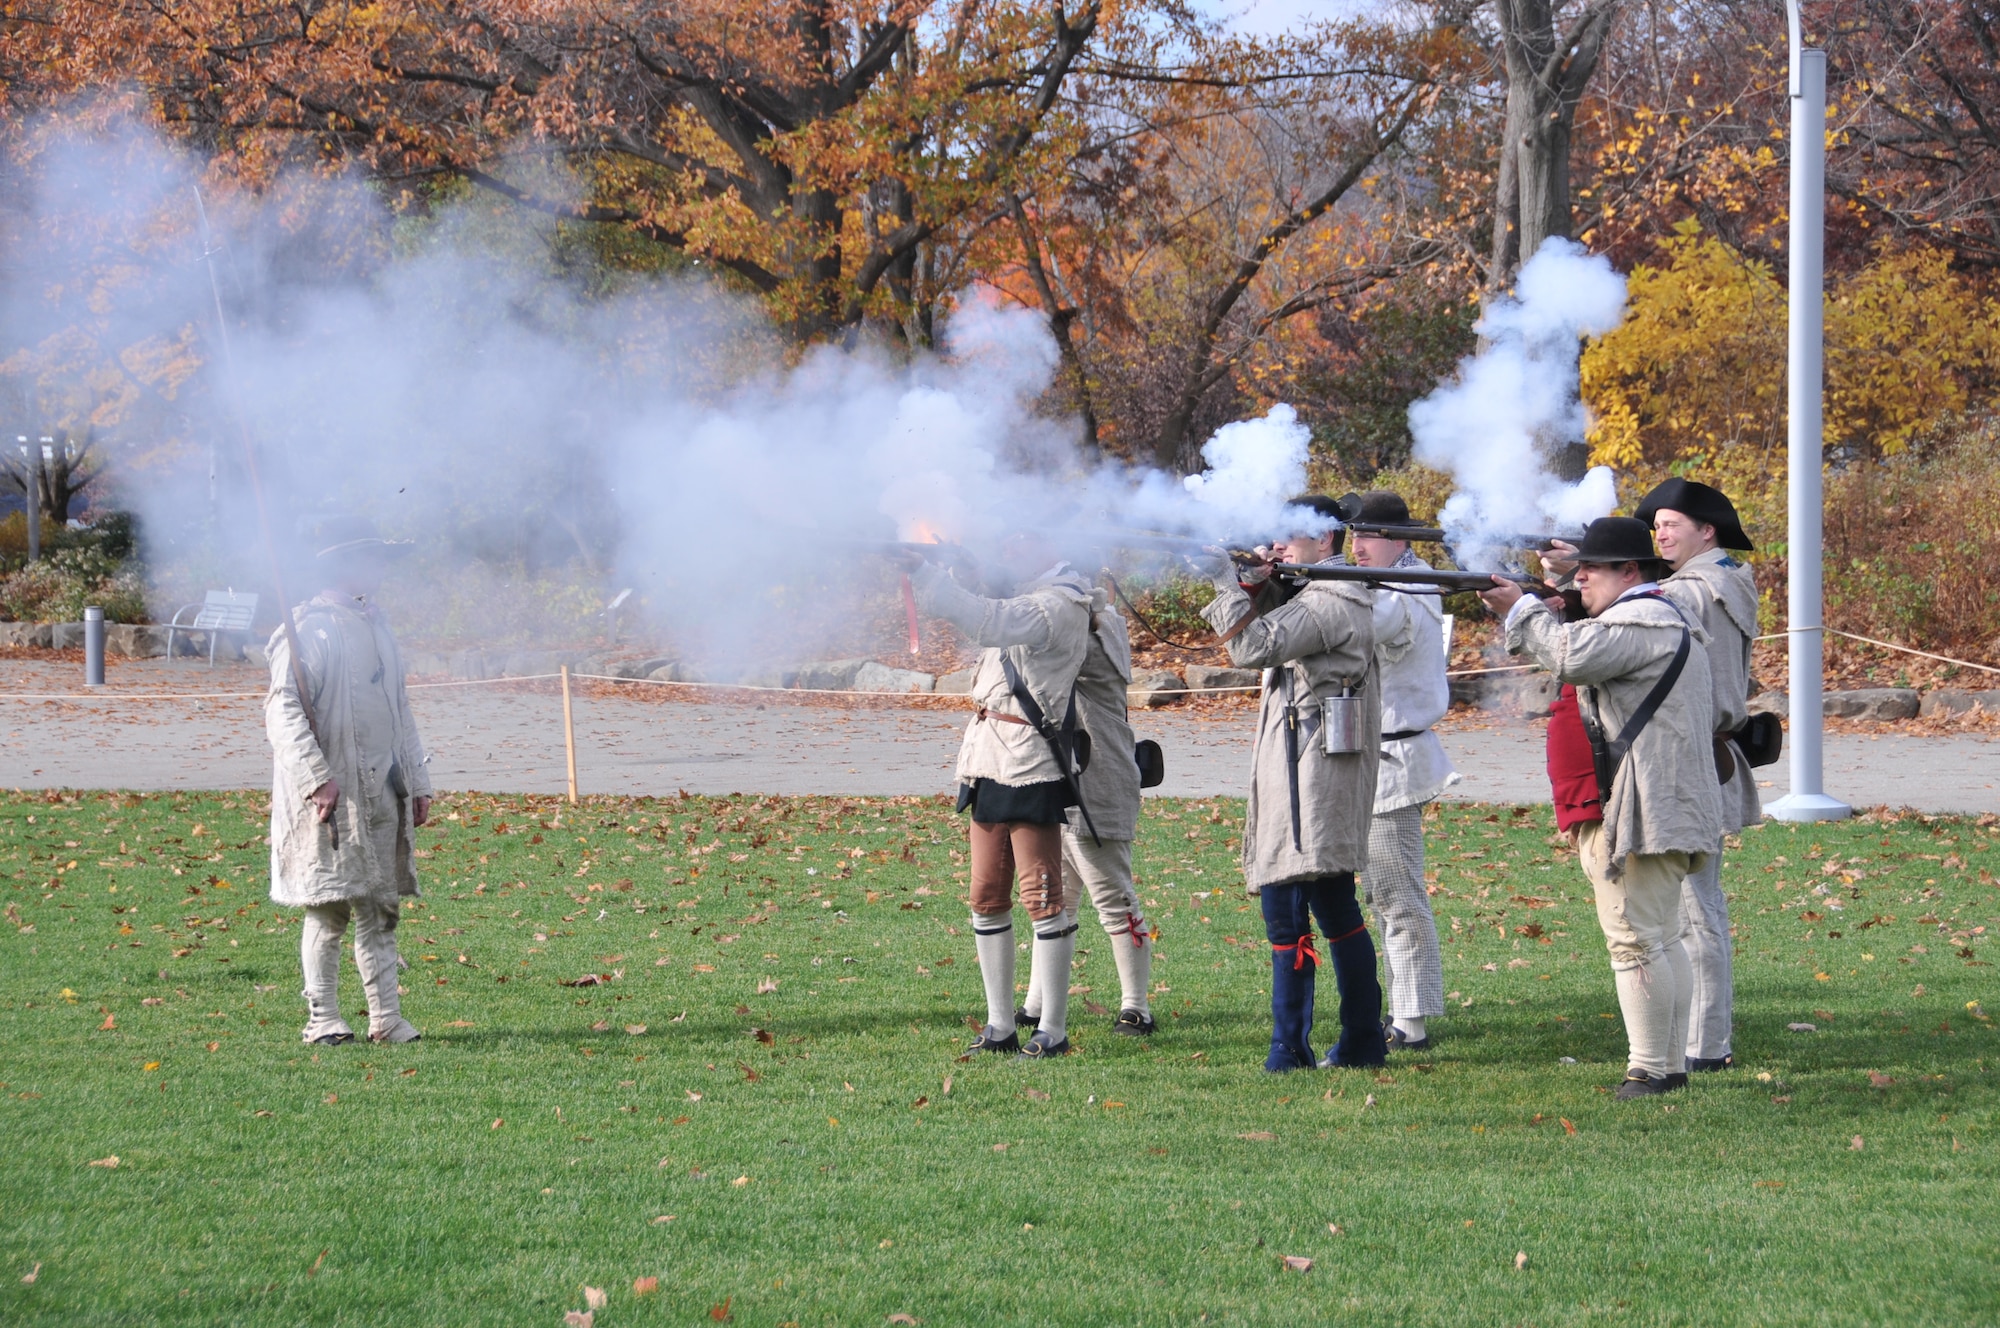 Reenactors from the French & Indian War fire their muskets. The Pennsylvania National Guard joined with the Pennsylvania Department of Conservation of Natural Resources' Point State Park and the Association of the United States Army to organize Steel City Salutes the Troops, Pittsburgh, Nov. 7, 2015. (U.S. Air National Guard Photo by Staff Sgt. Ryan Conley)